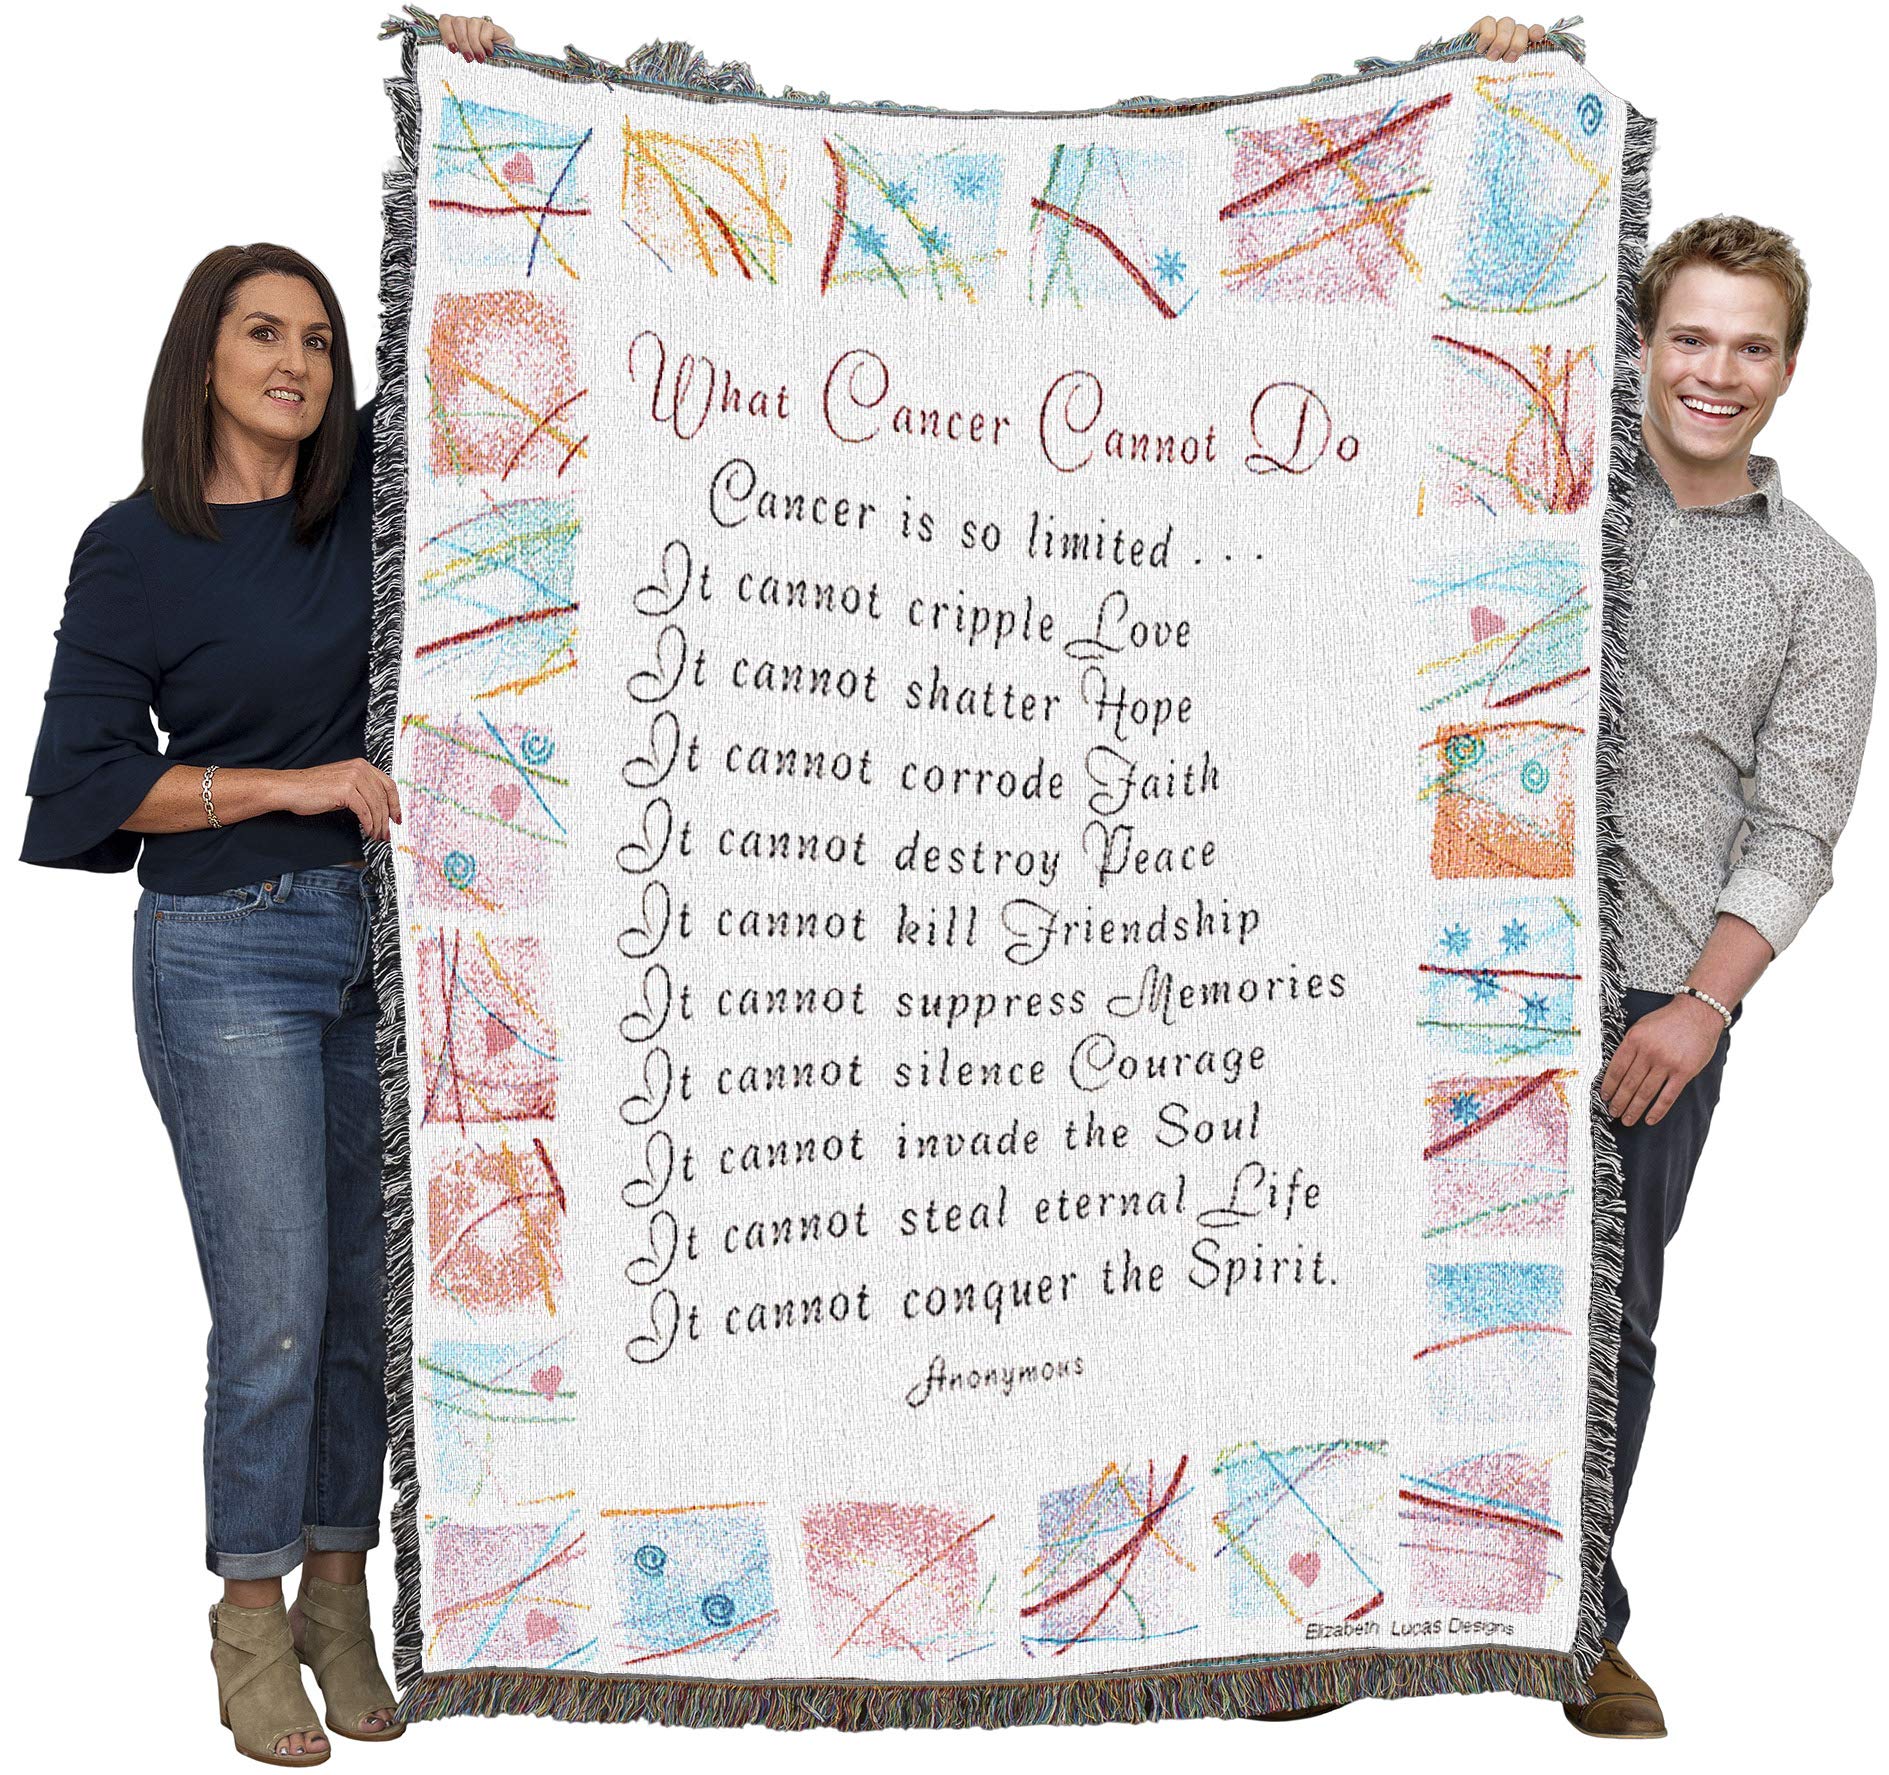 What Cancer Cannot Do - Elizabeth Lucas Designs - Cotton Woven Blanket Throw - Made in The USA (72x54)